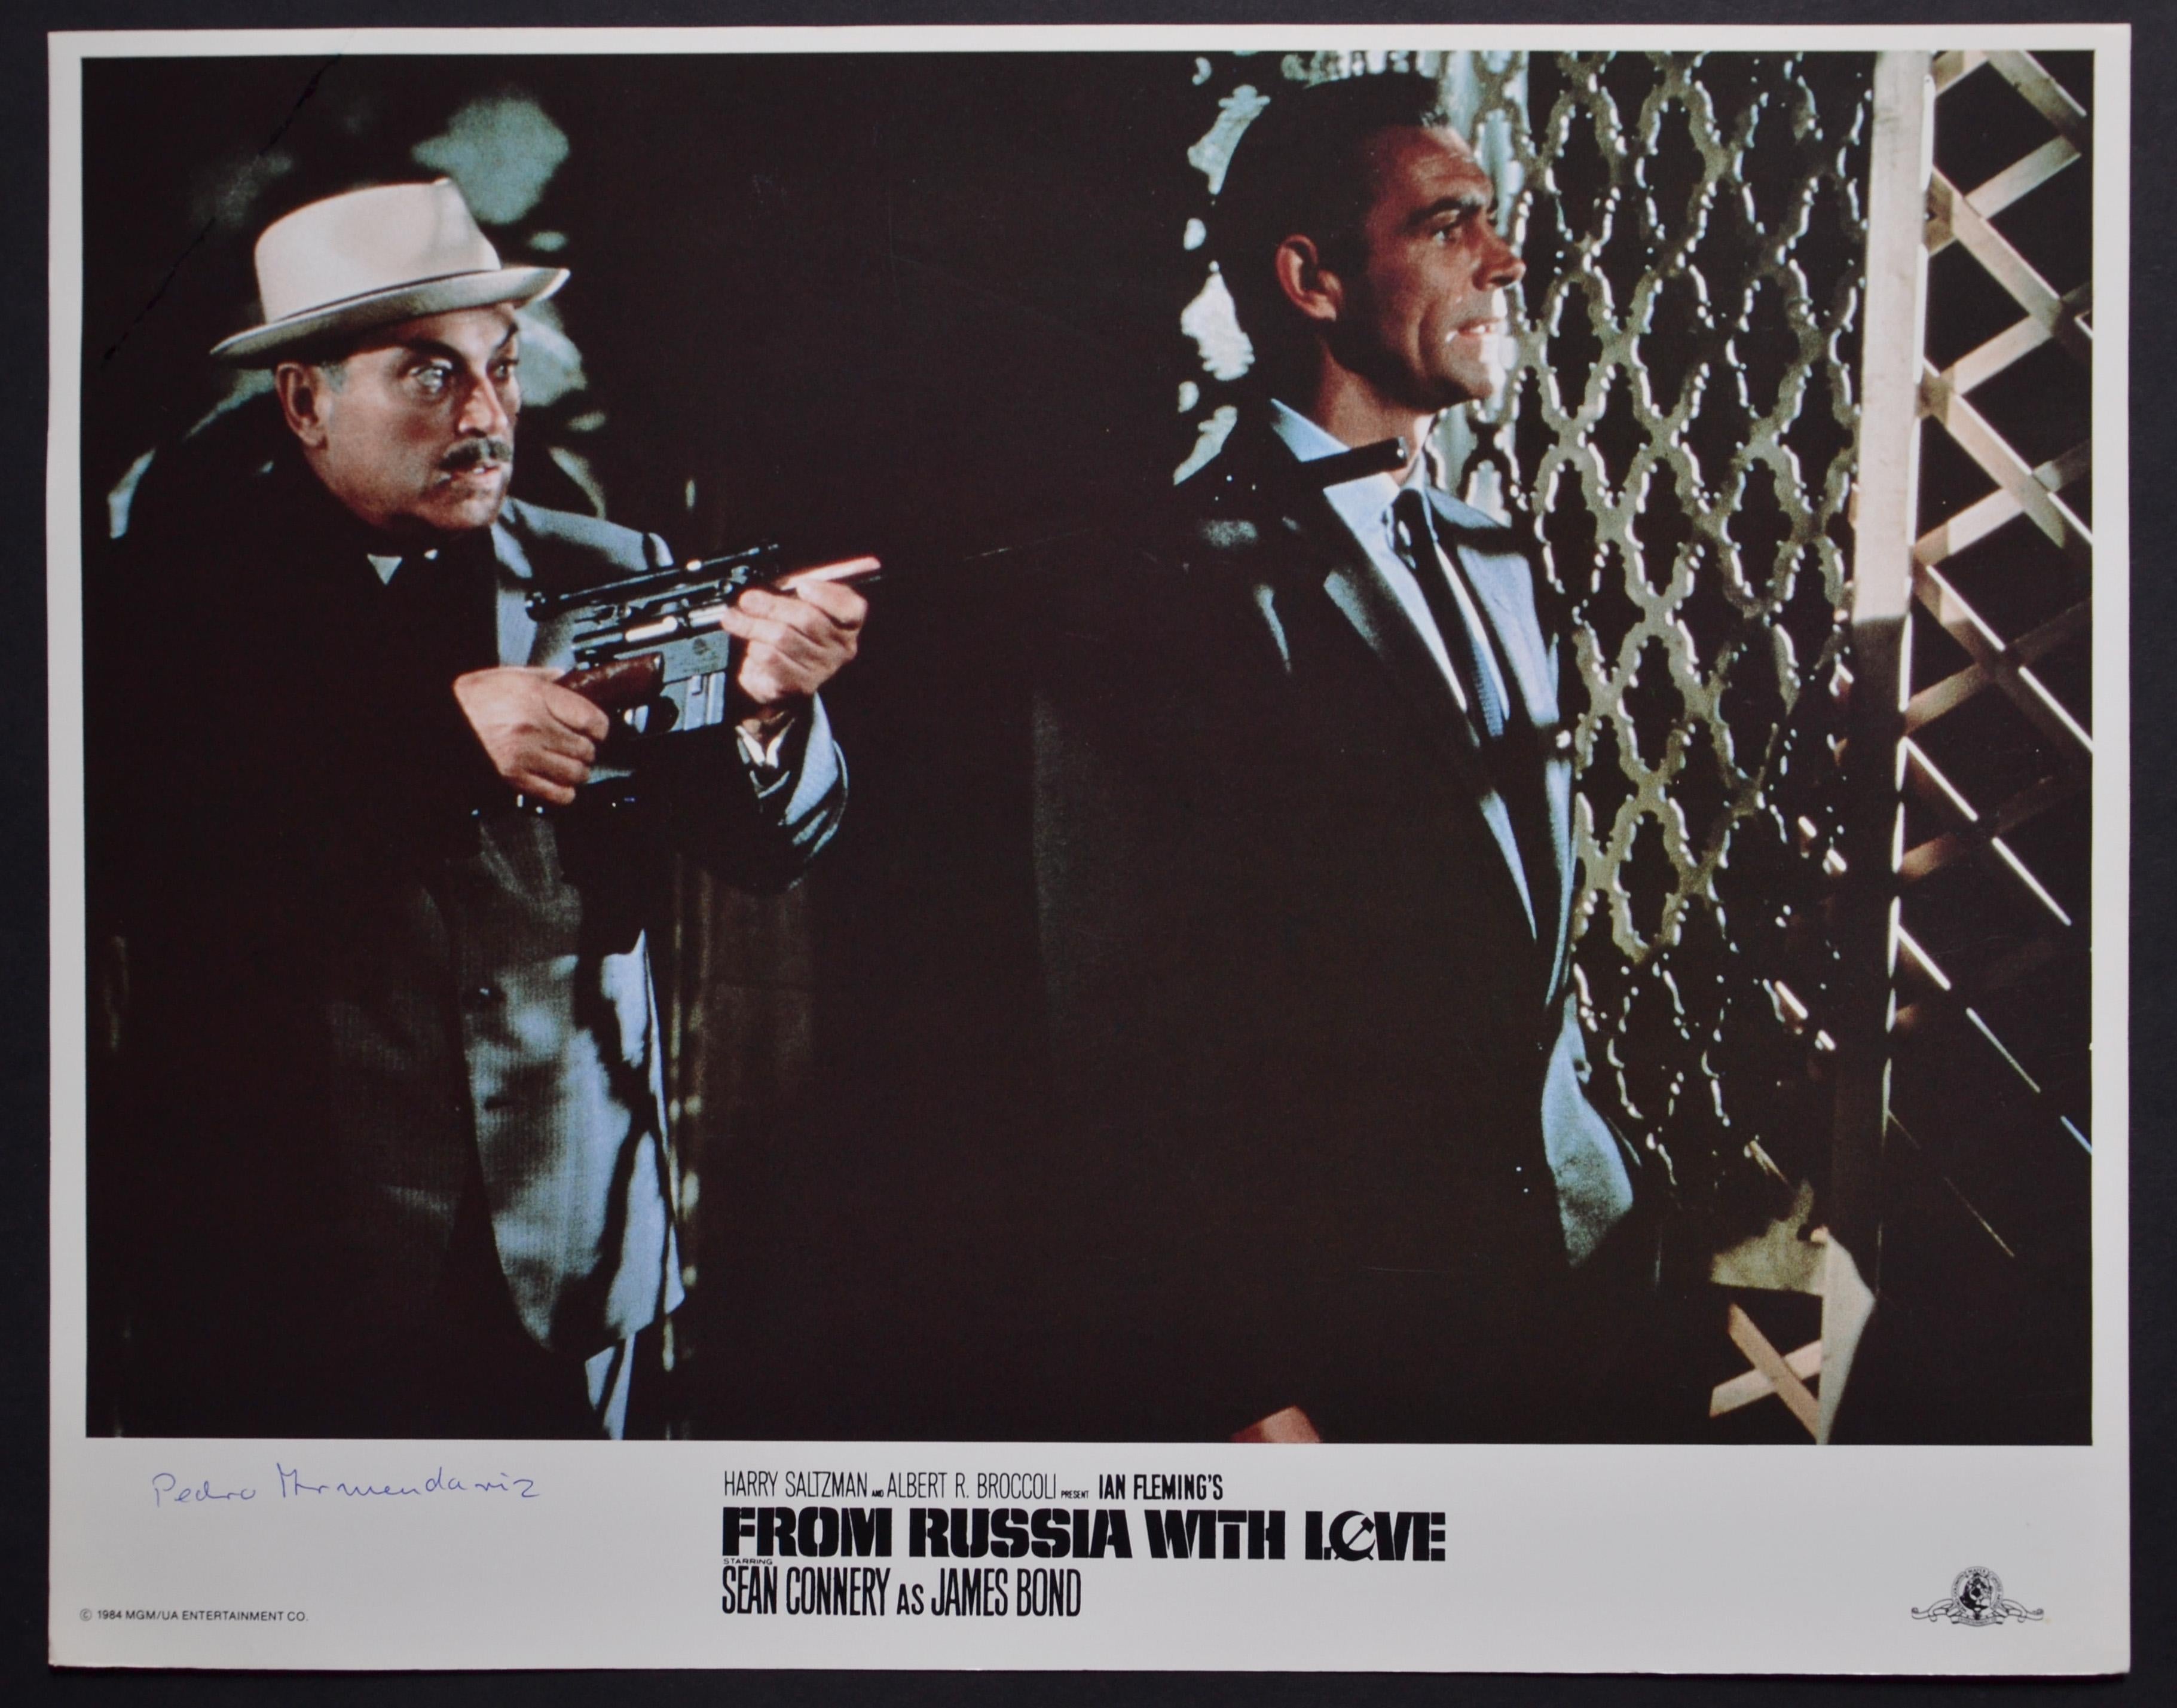 Unknown Interior Print - "James Bond 007 - From Russia with love" Original Lobby Card, UK 1963